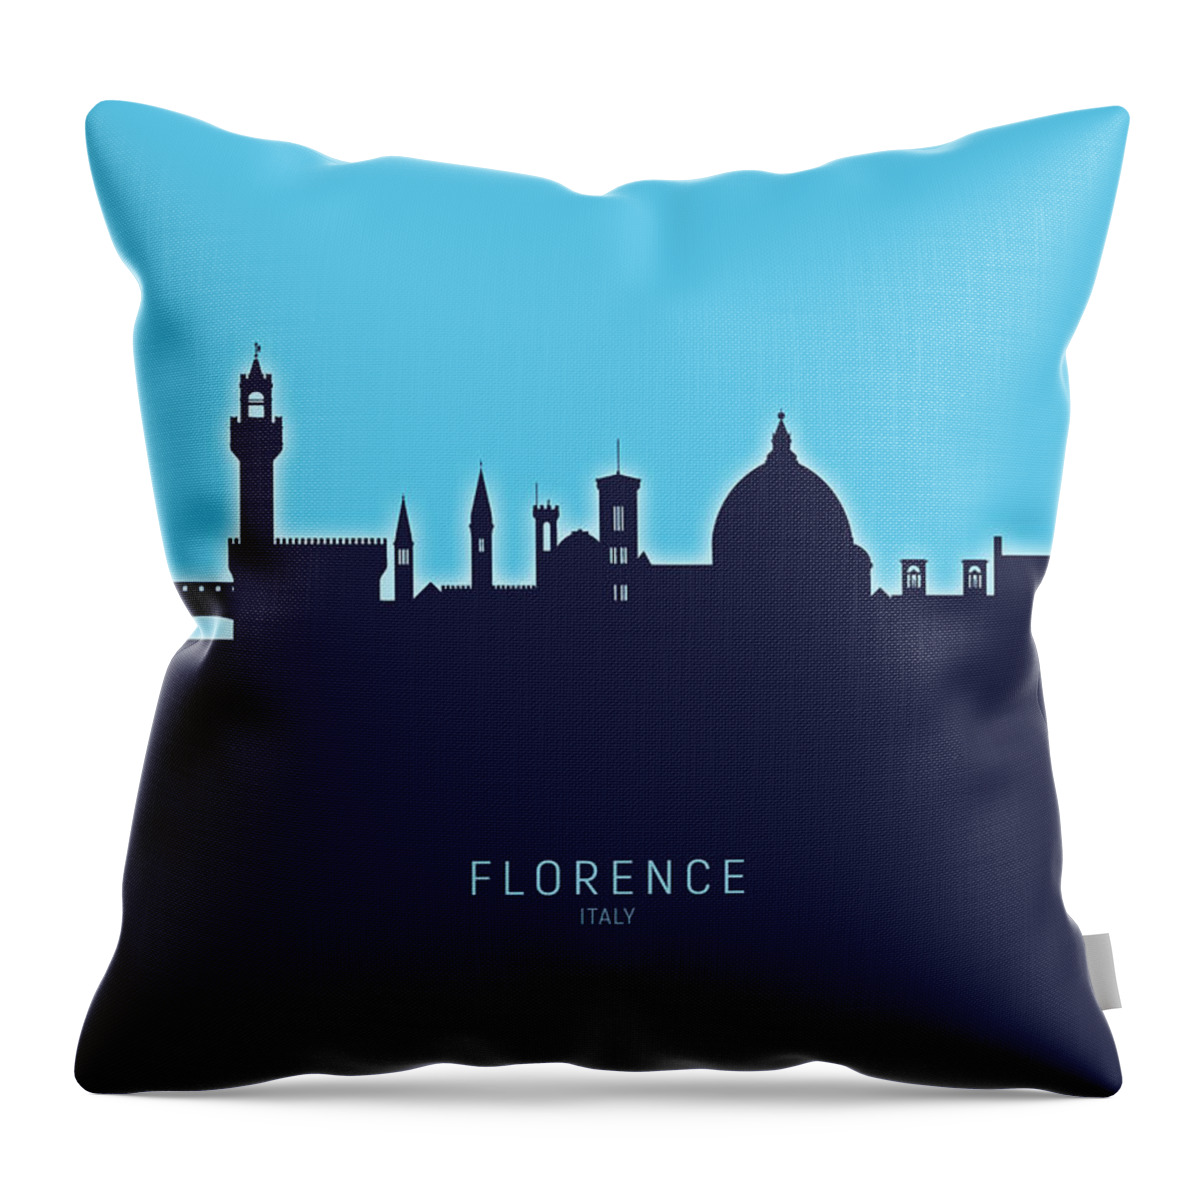 Florence Throw Pillow featuring the digital art Florence Italy Skyline #31 by Michael Tompsett